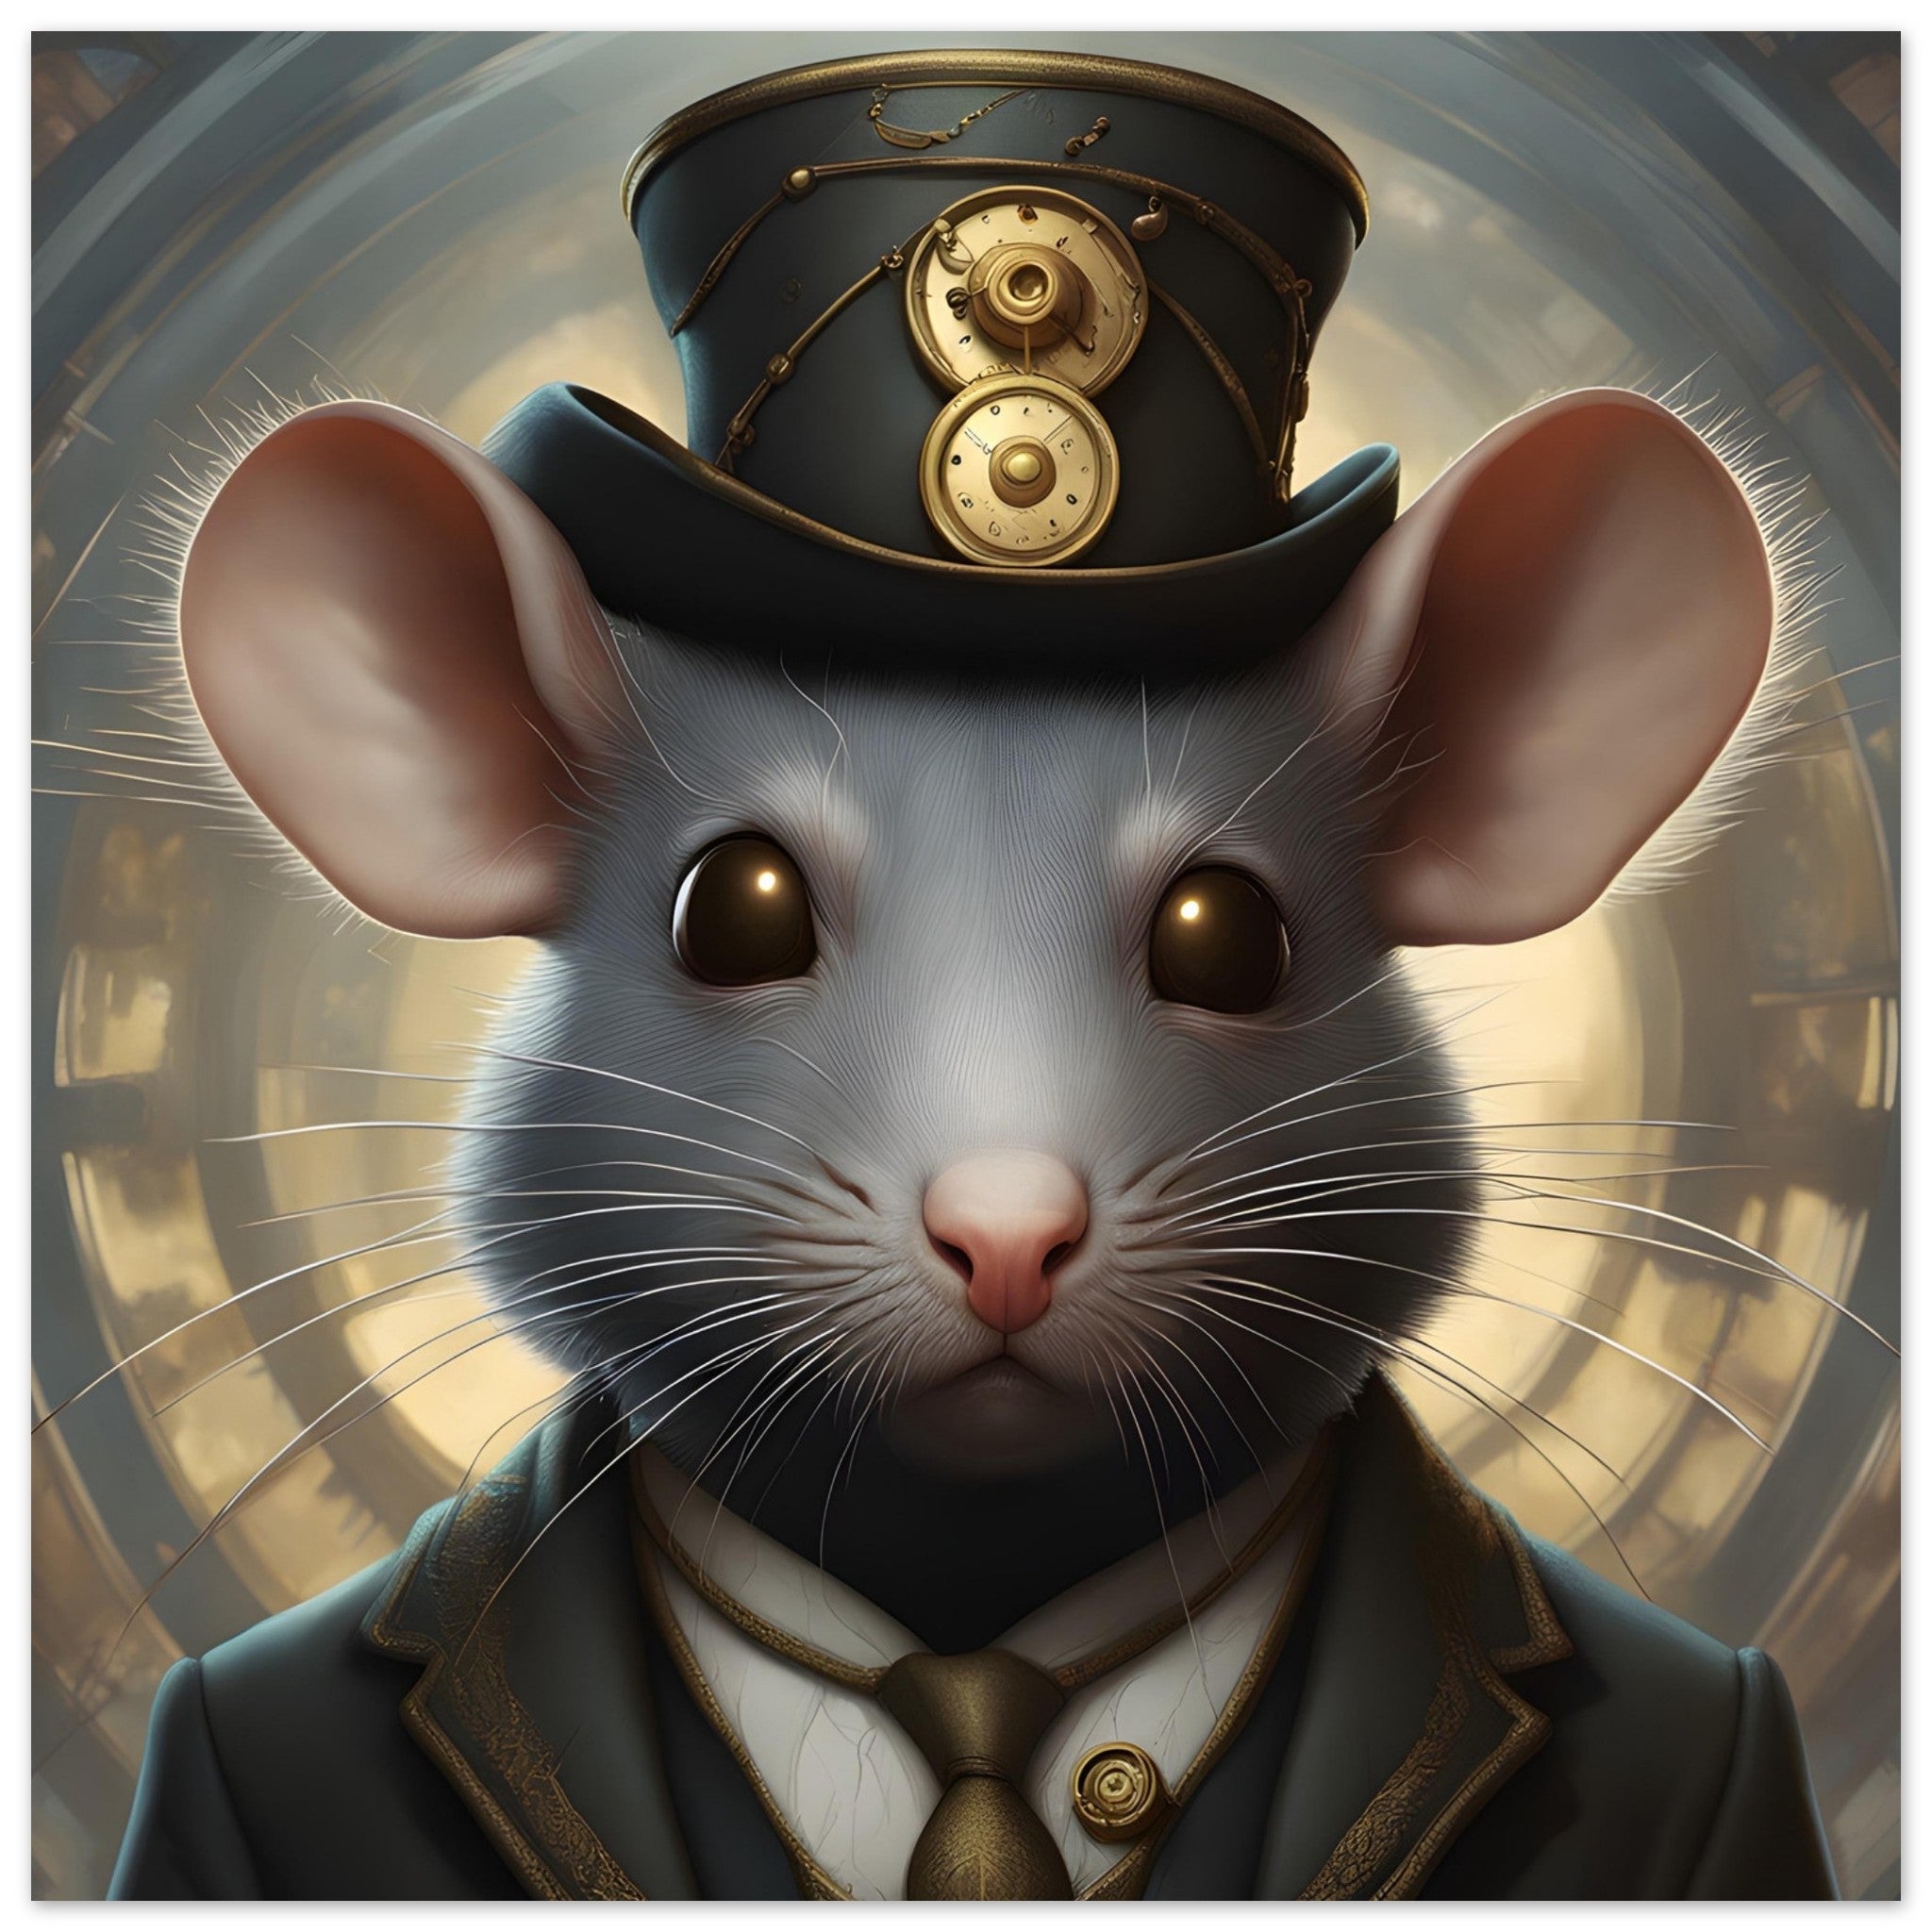 Steampunk Art - The Mouse